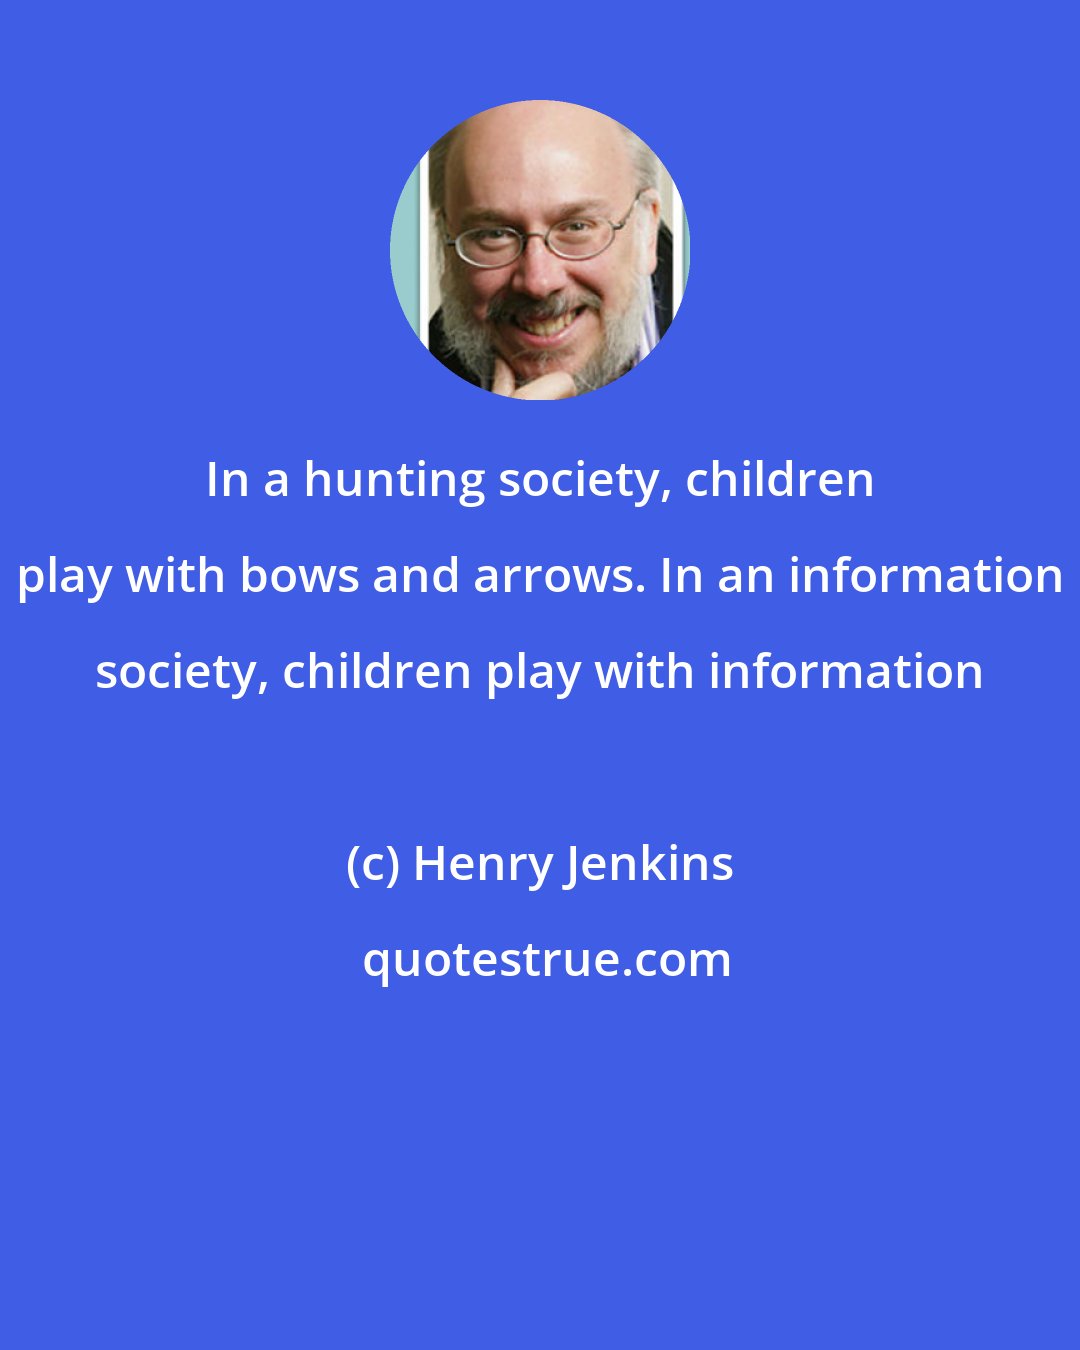 Henry Jenkins: In a hunting society, children play with bows and arrows. In an information society, children play with information